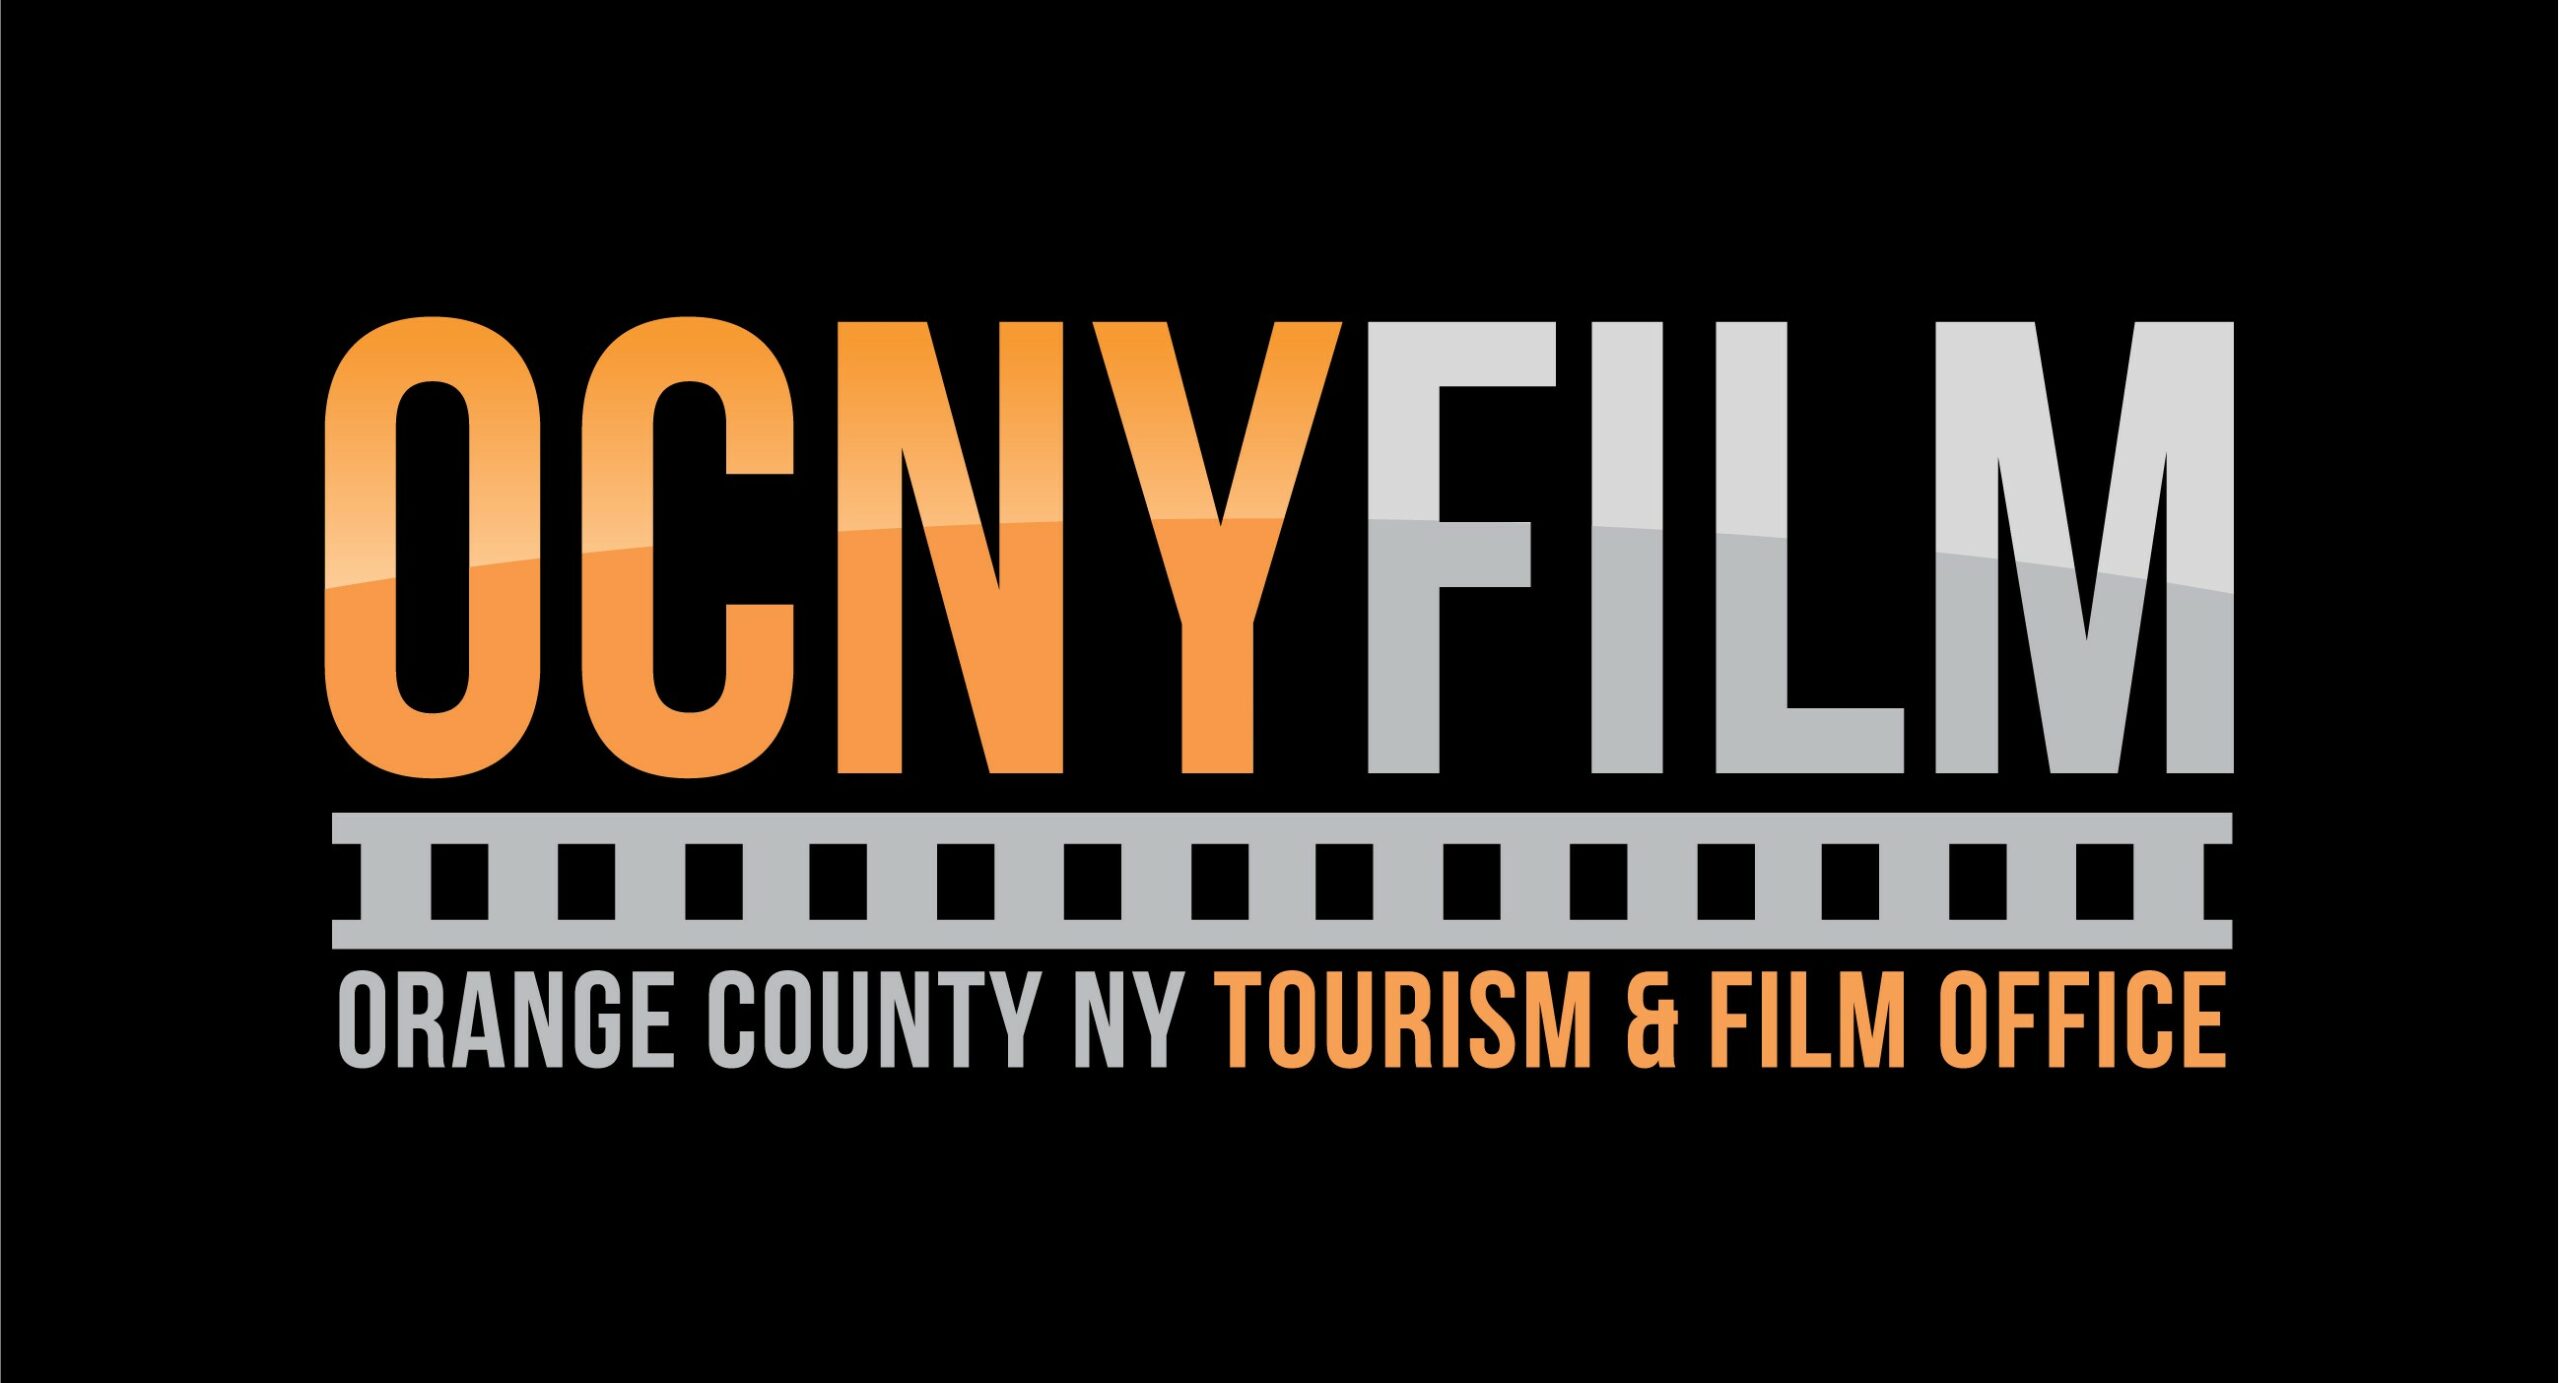 Winter Film Awards February 22-March 3, 2018 New York City Still Accepting Submissions!